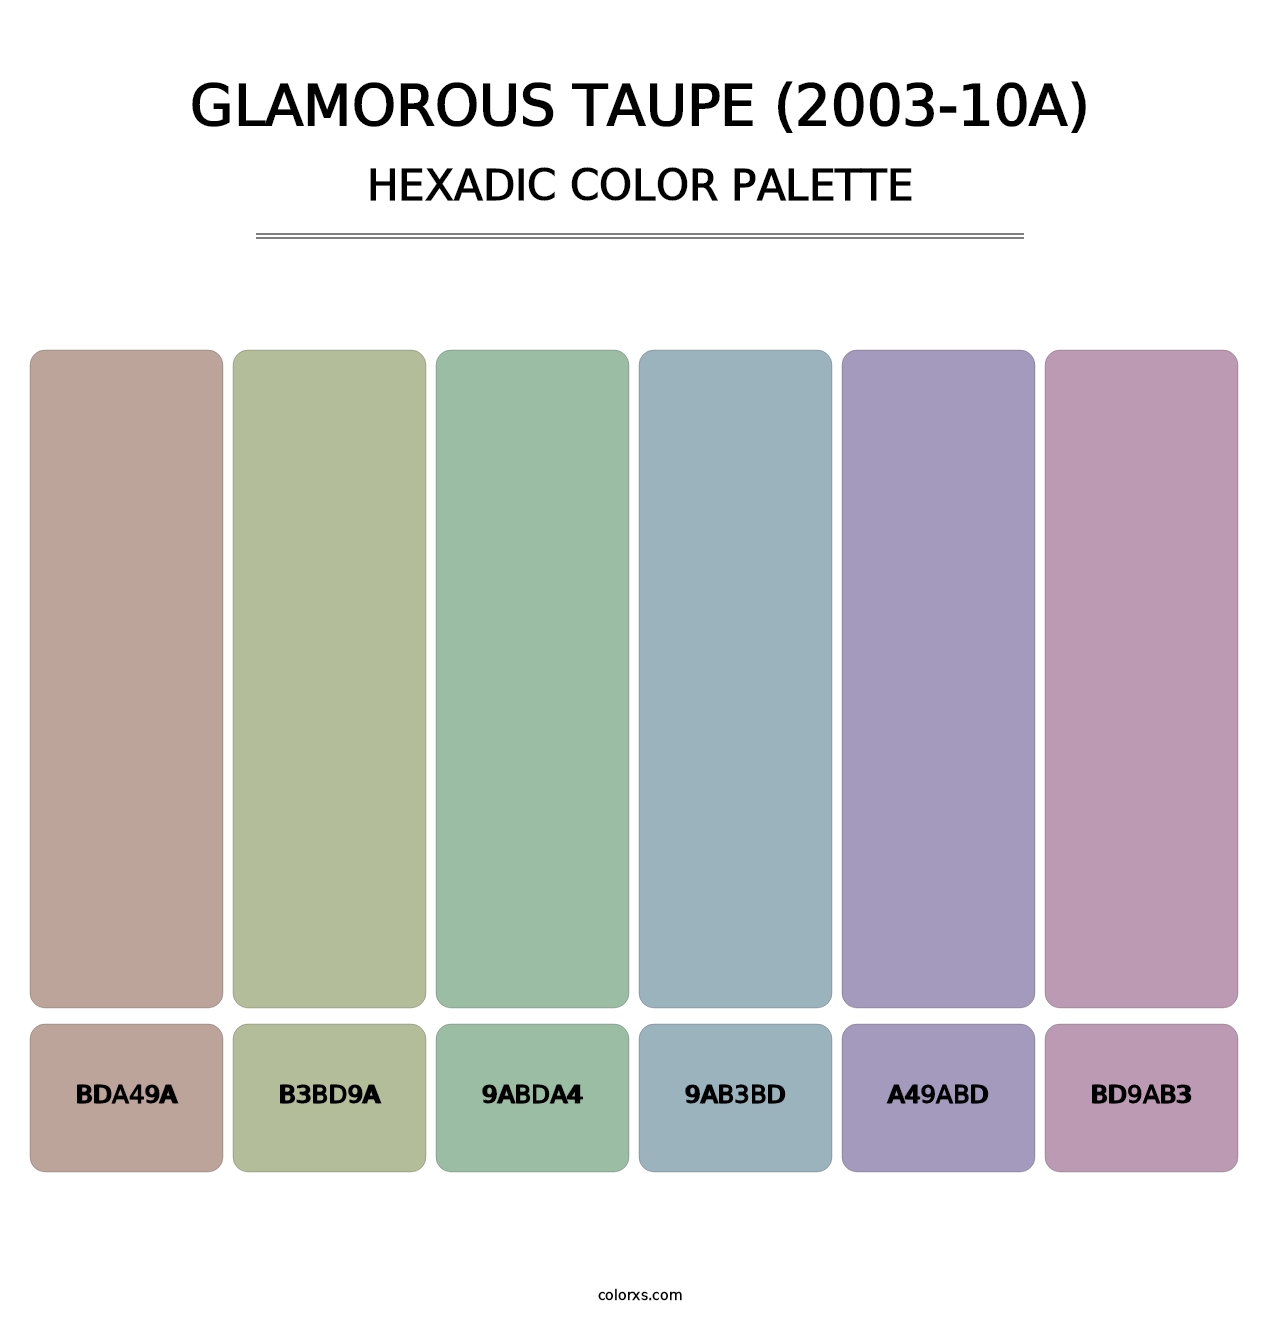 Glamorous Taupe (2003-10A) - Hexadic Color Palette